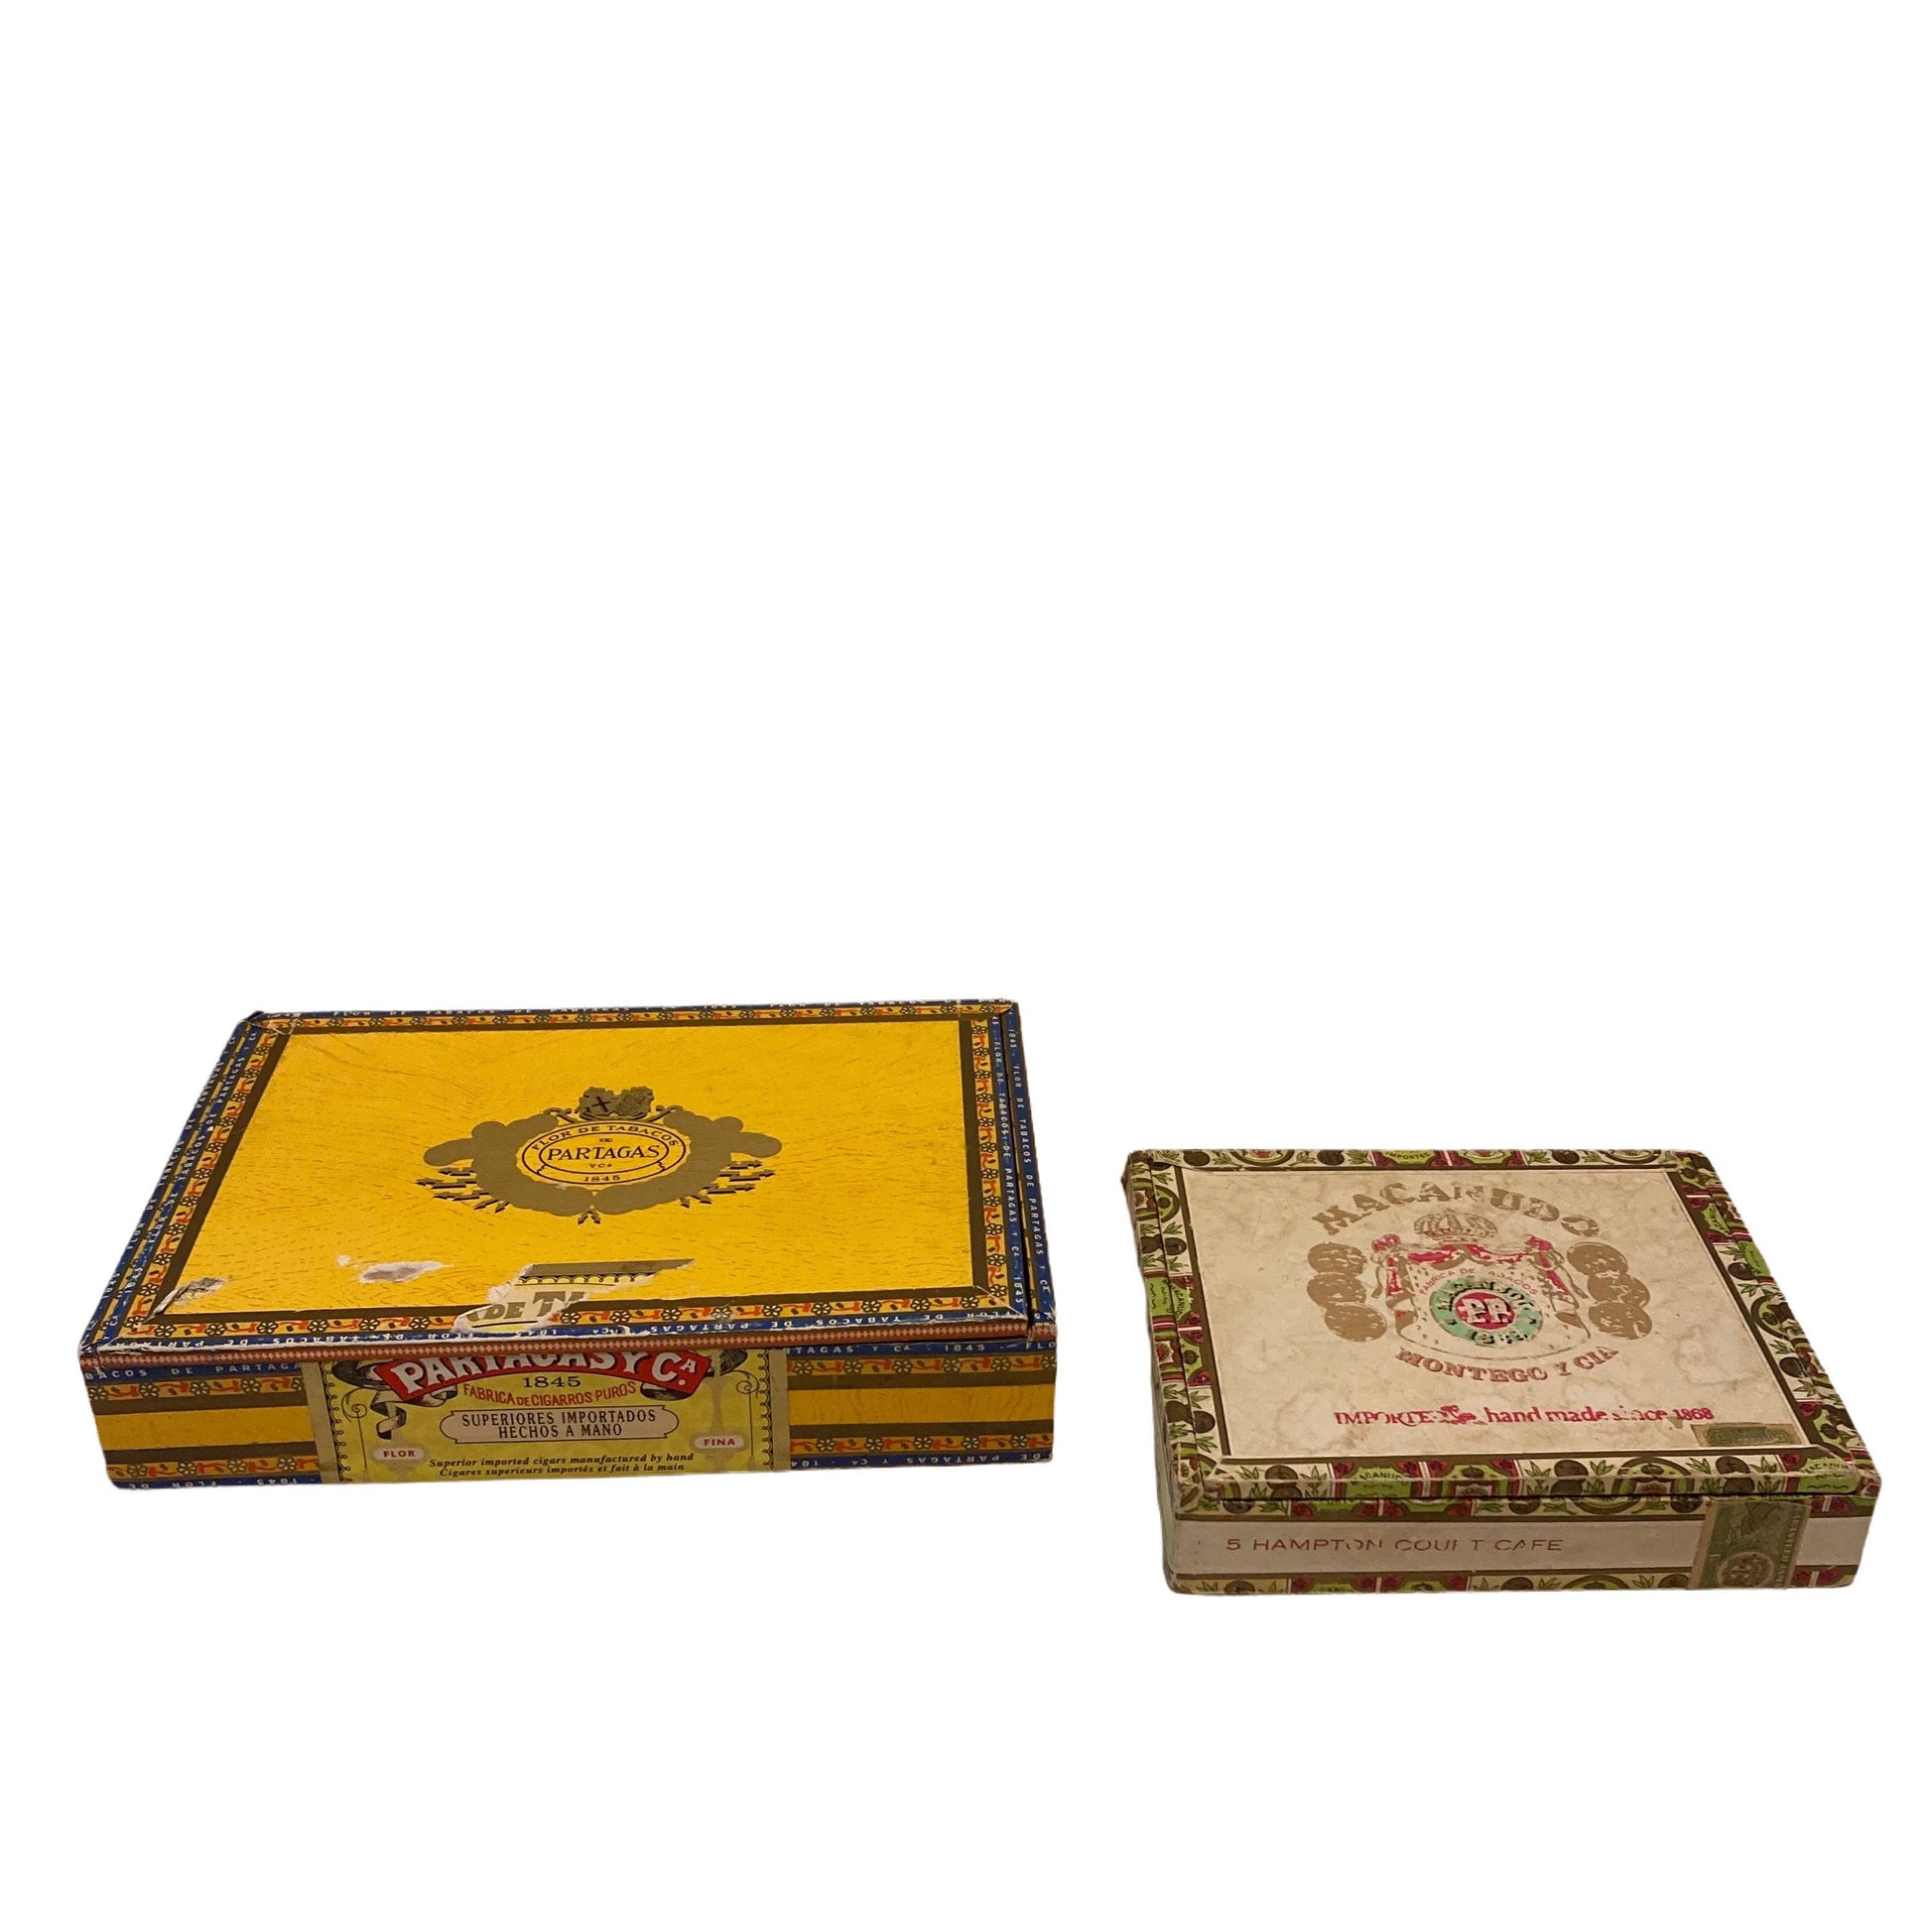 Empty Wooden Cigar Boxes